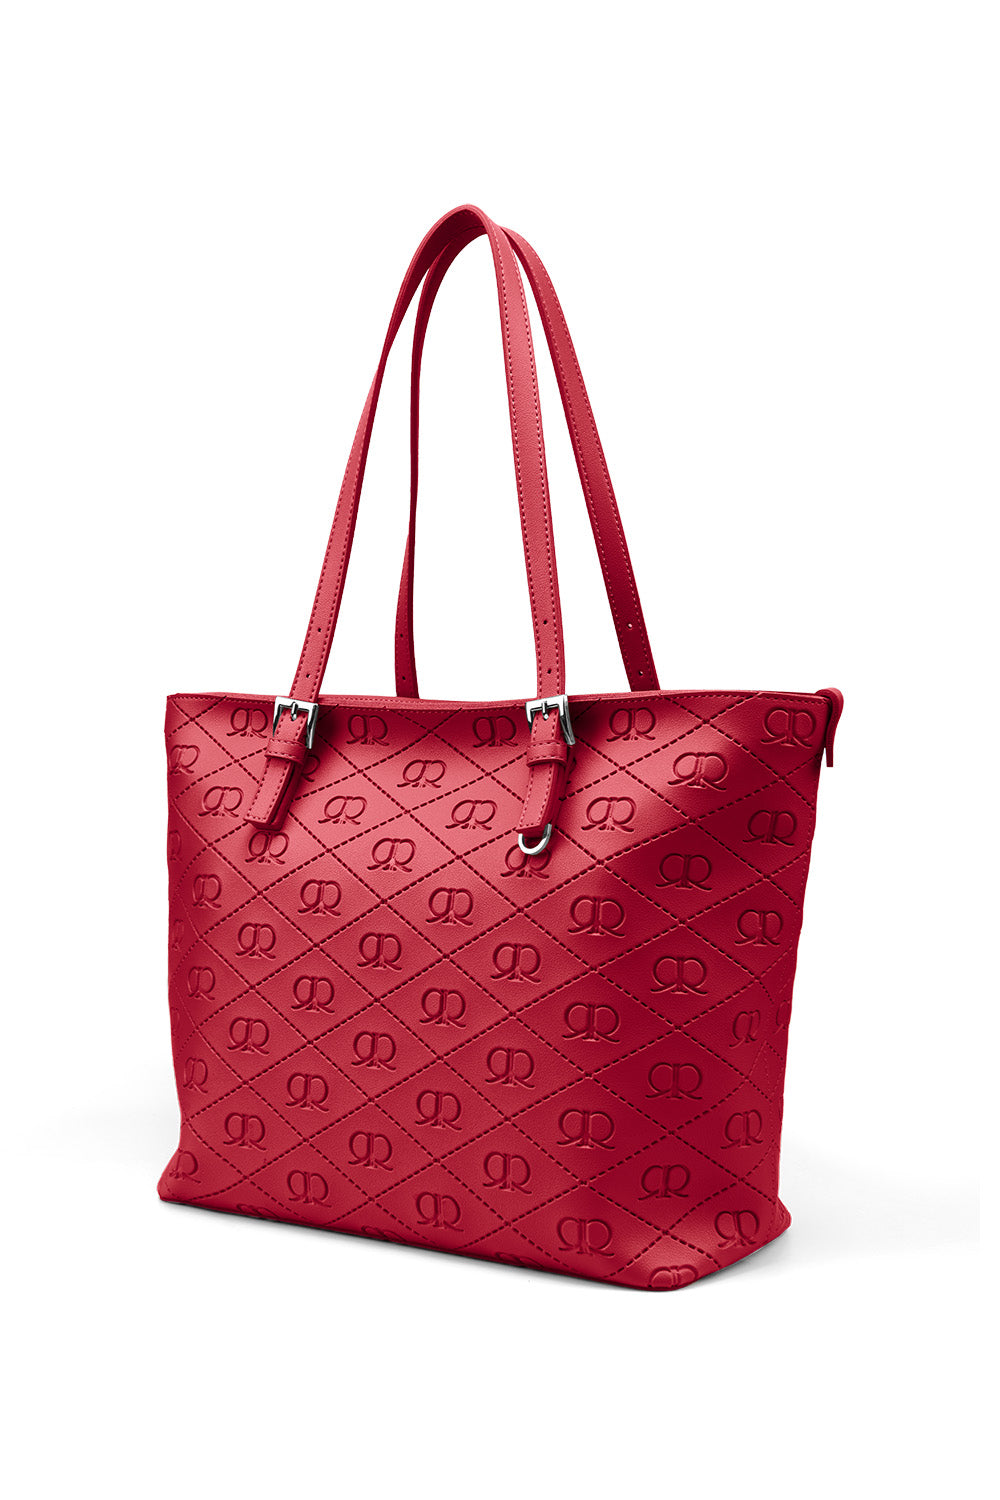 RR Basic Tote in Red